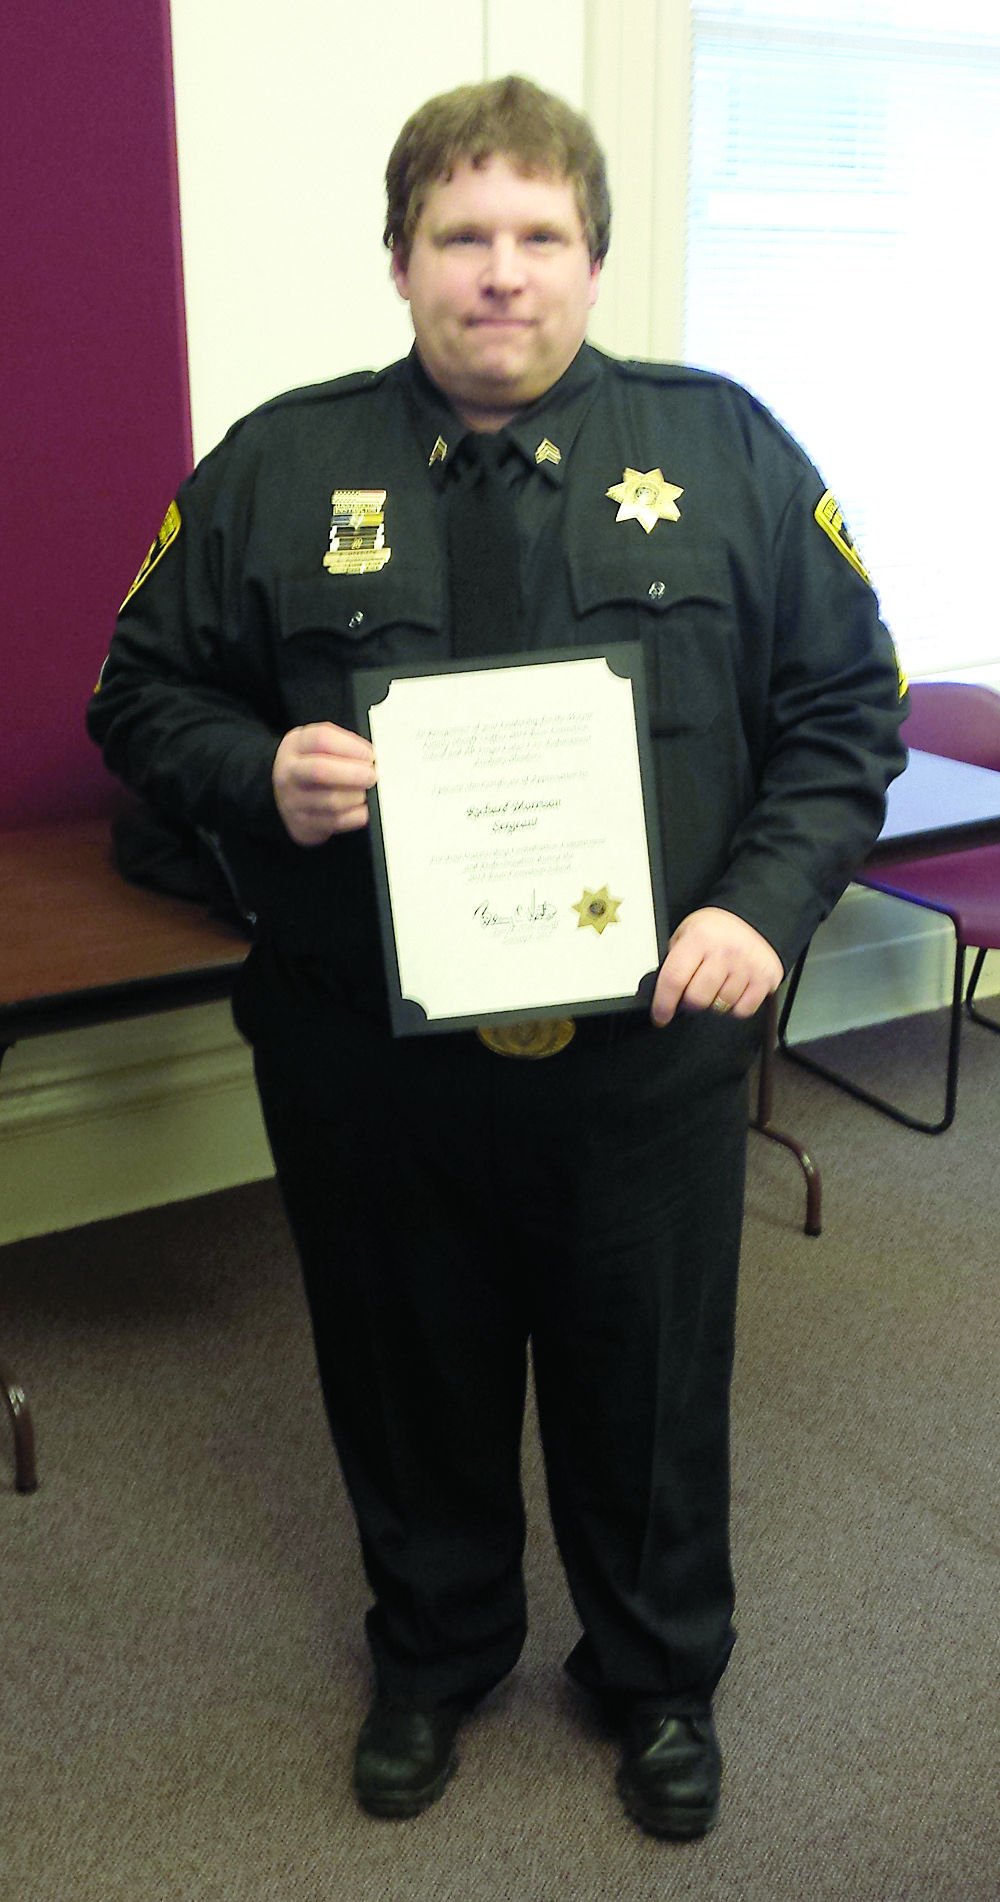 WAYNE COUNTY: Sheriff’s office recognizes sergeants’ contributions